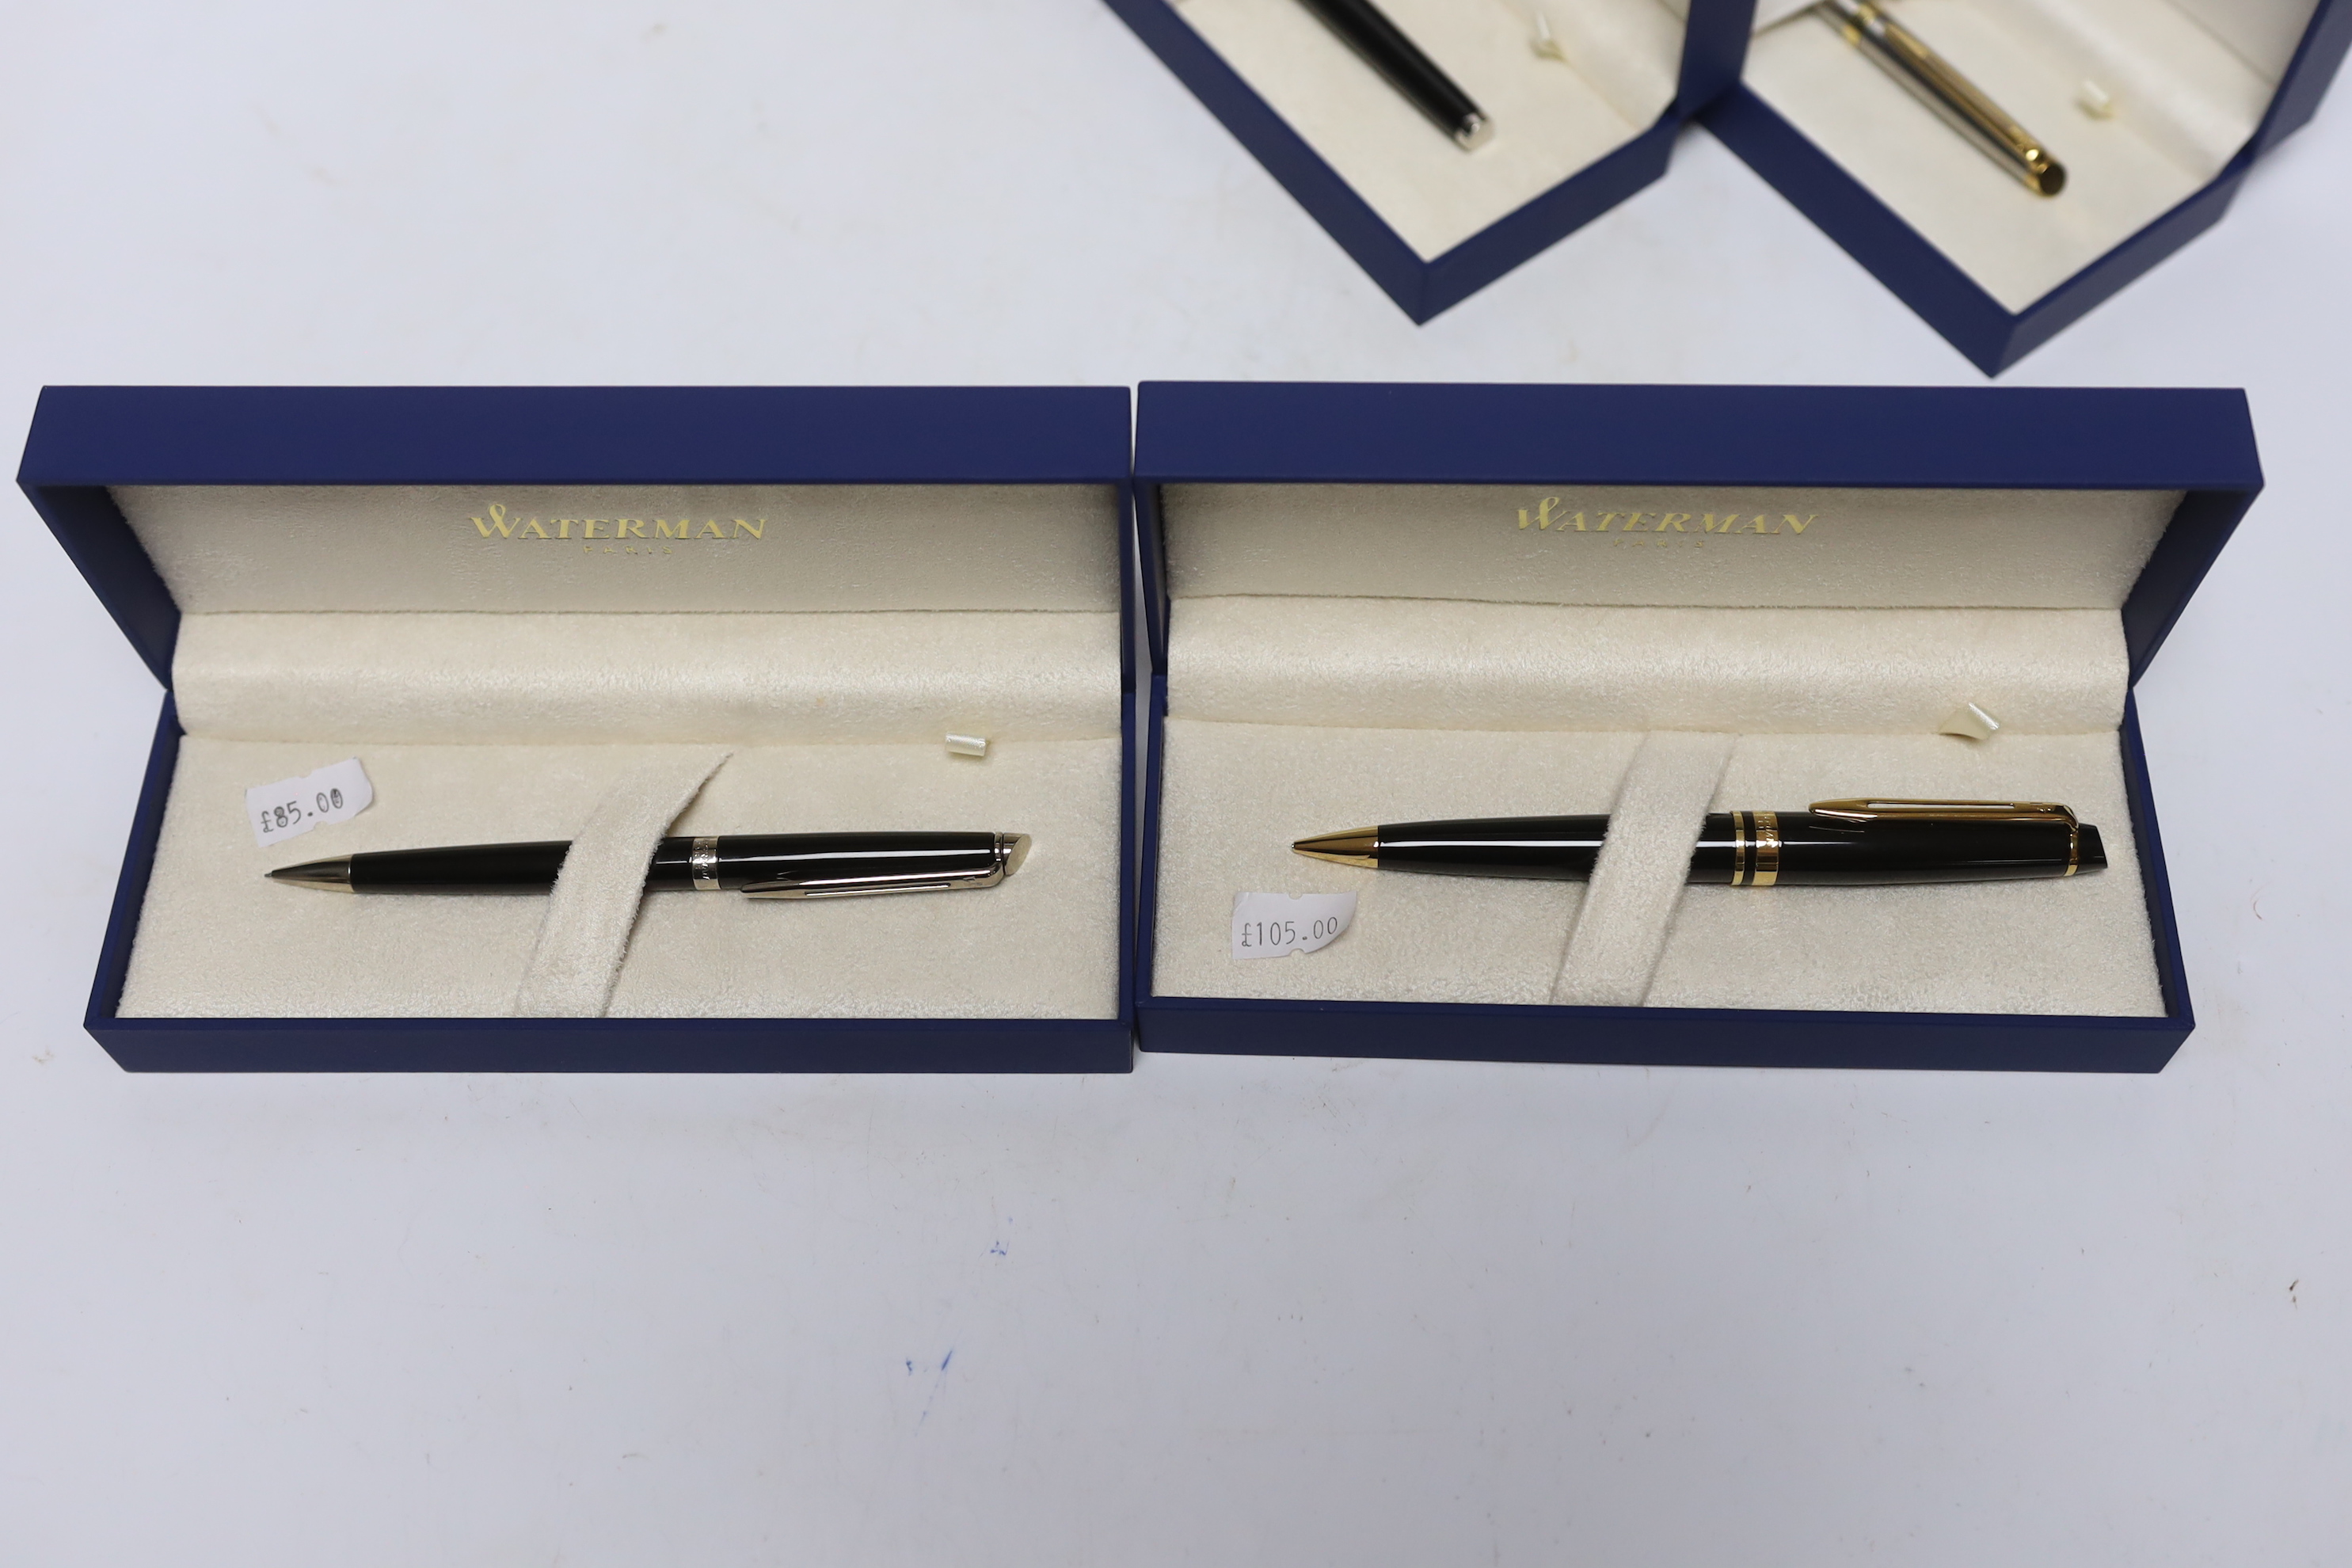 Four Waterman writing implements, including three propelling pencils; two Hemisphere pencils and an Expert pencil, and an Hemisphere fountain pen